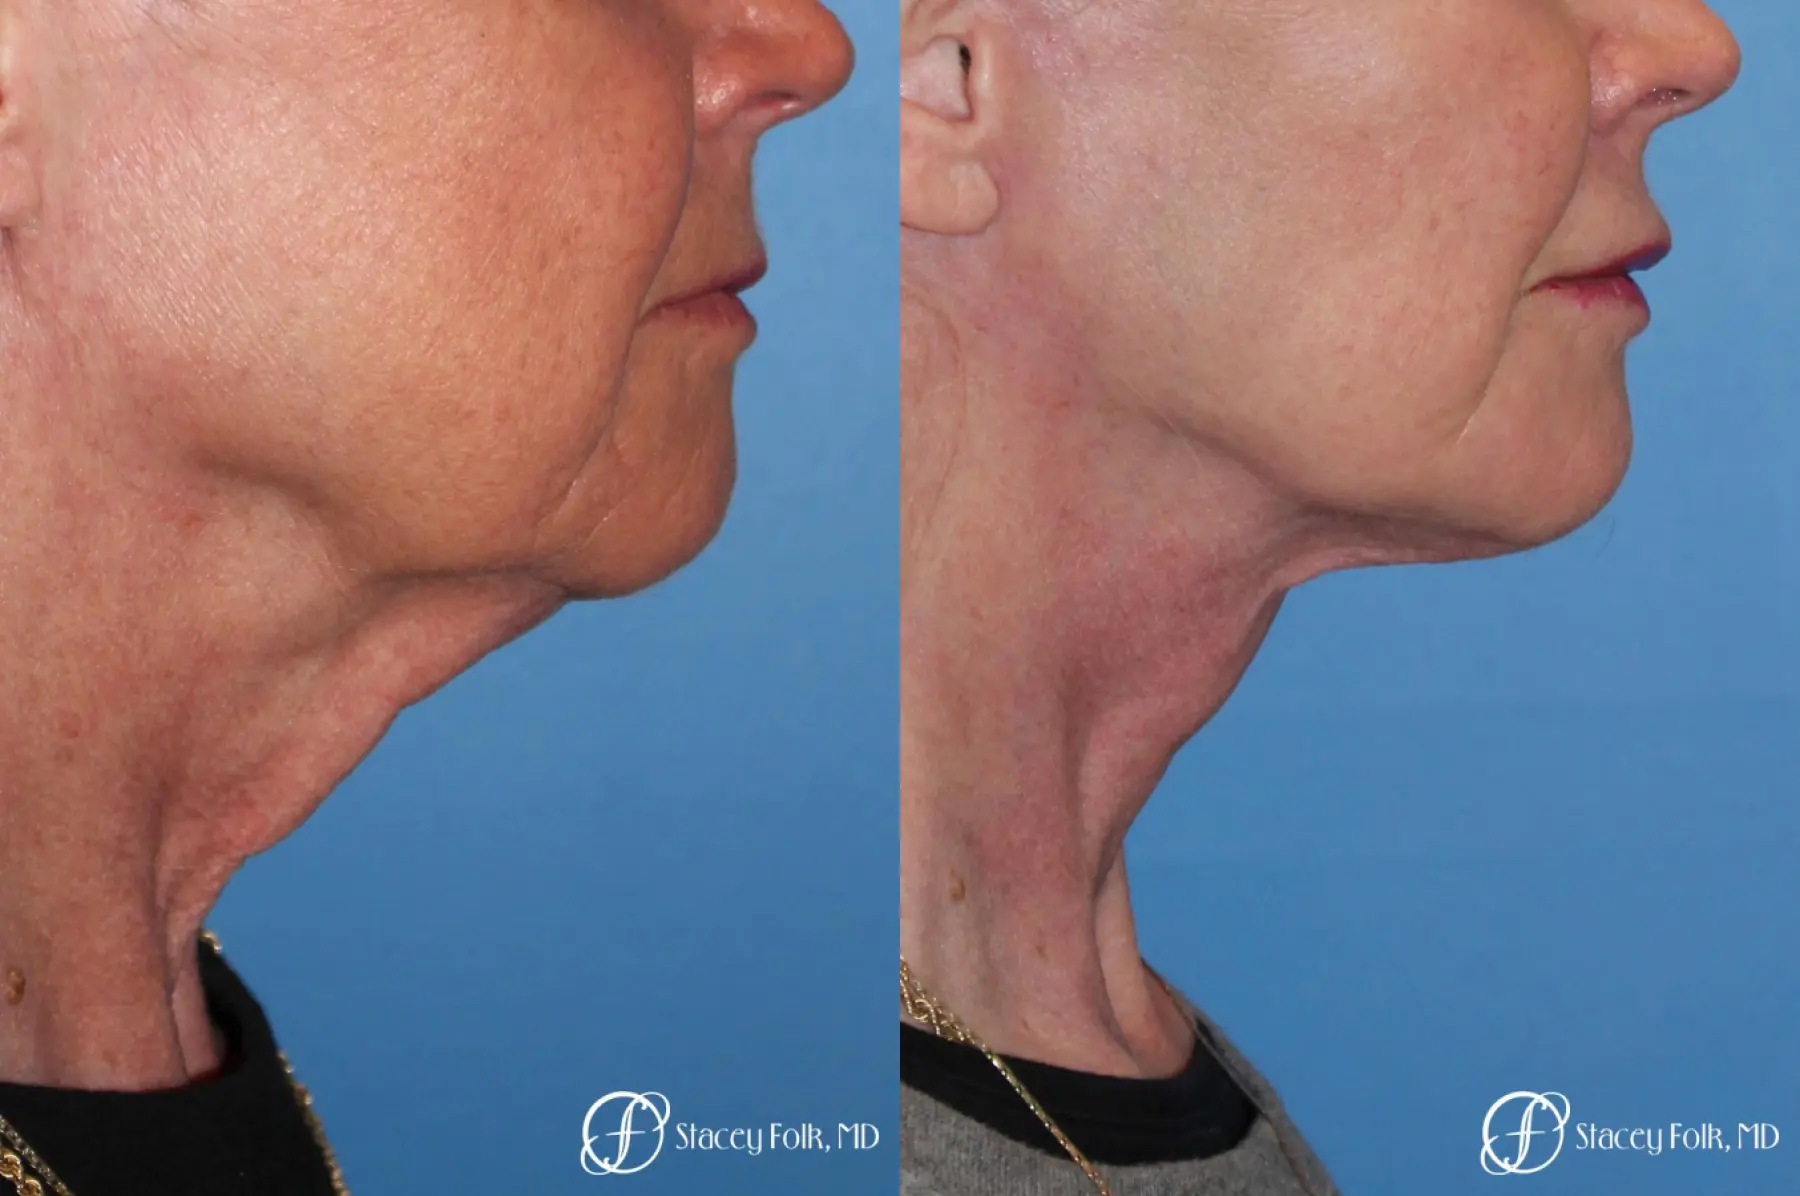 Denver Facial Rejuvenation Face lift, Fat Injections, and Laser Resurfacing 7131 - Before and After 1